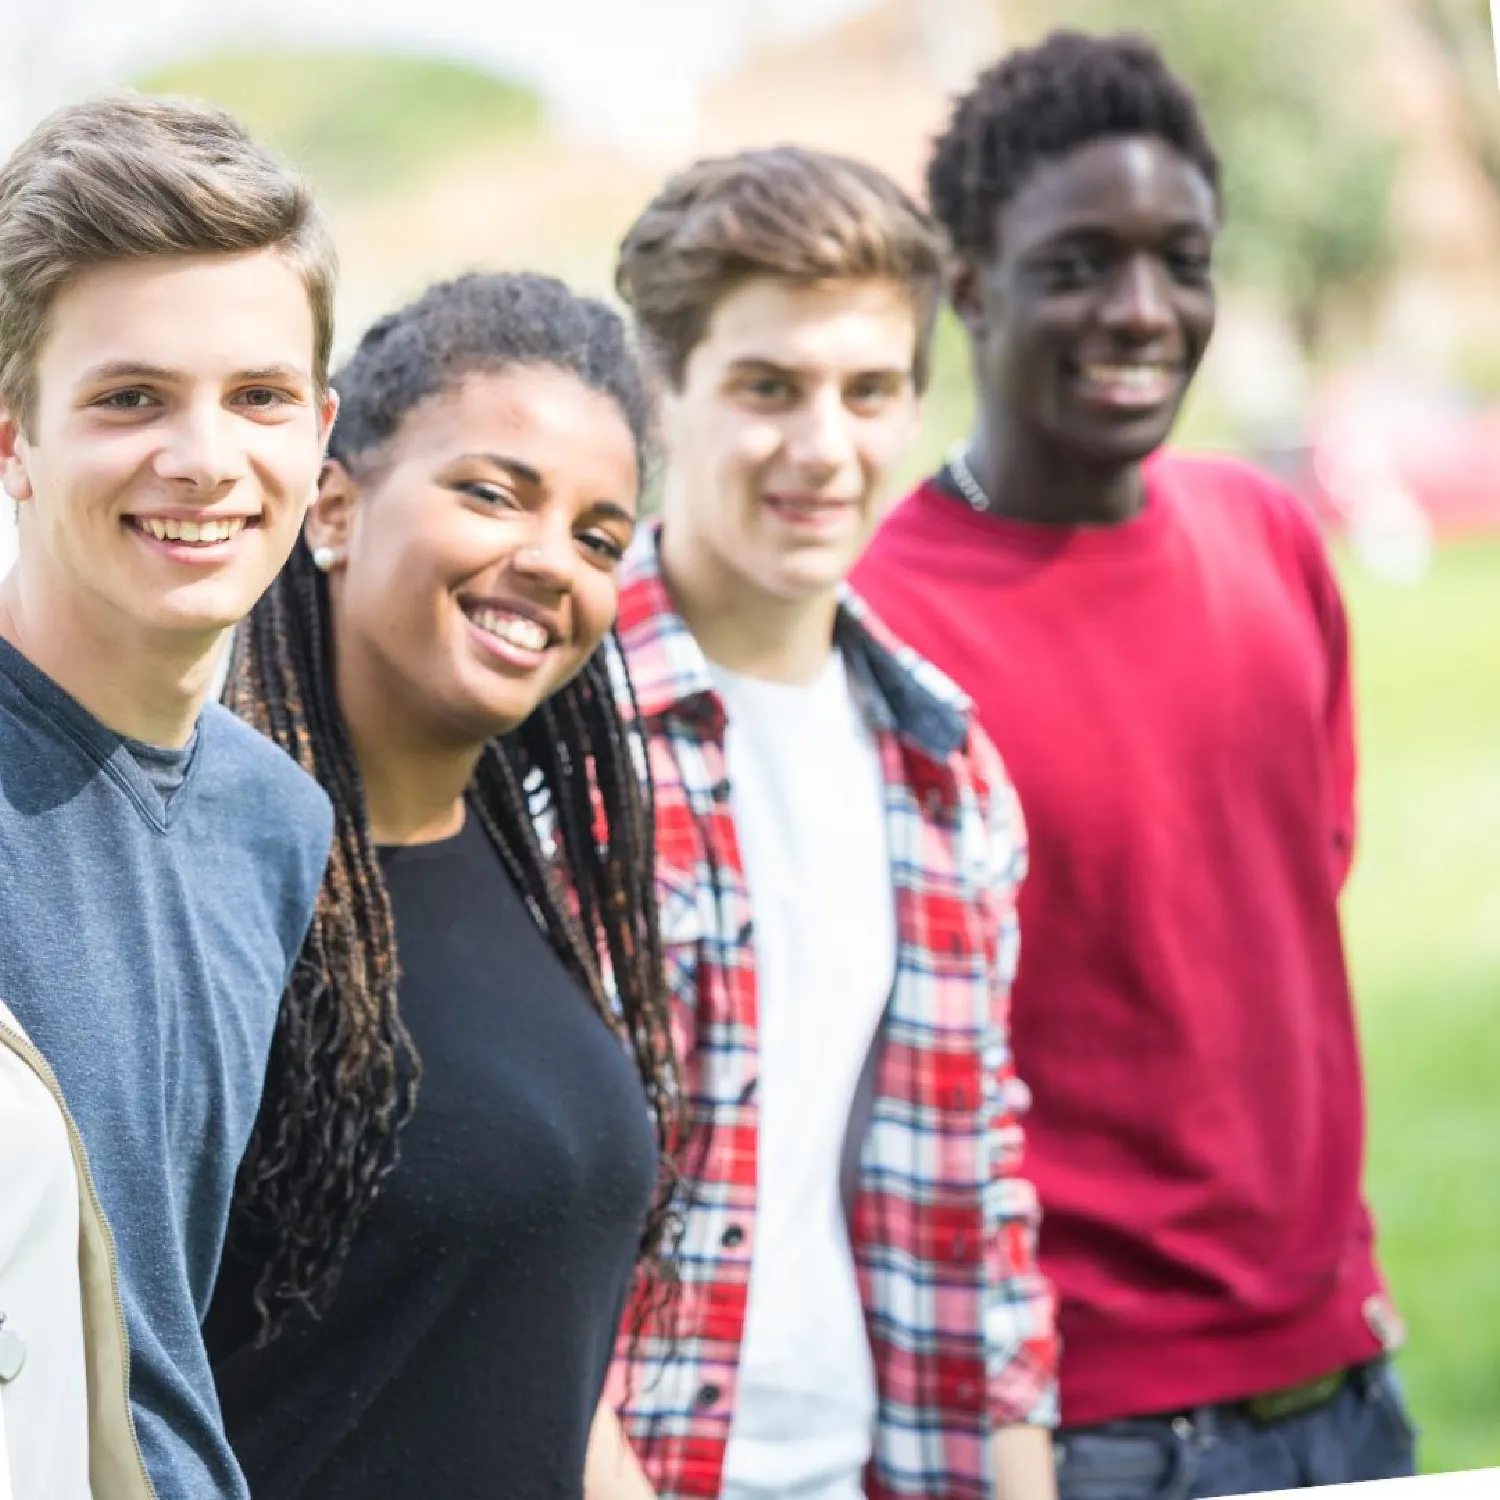 photo of 4 young people in an outdoor setting